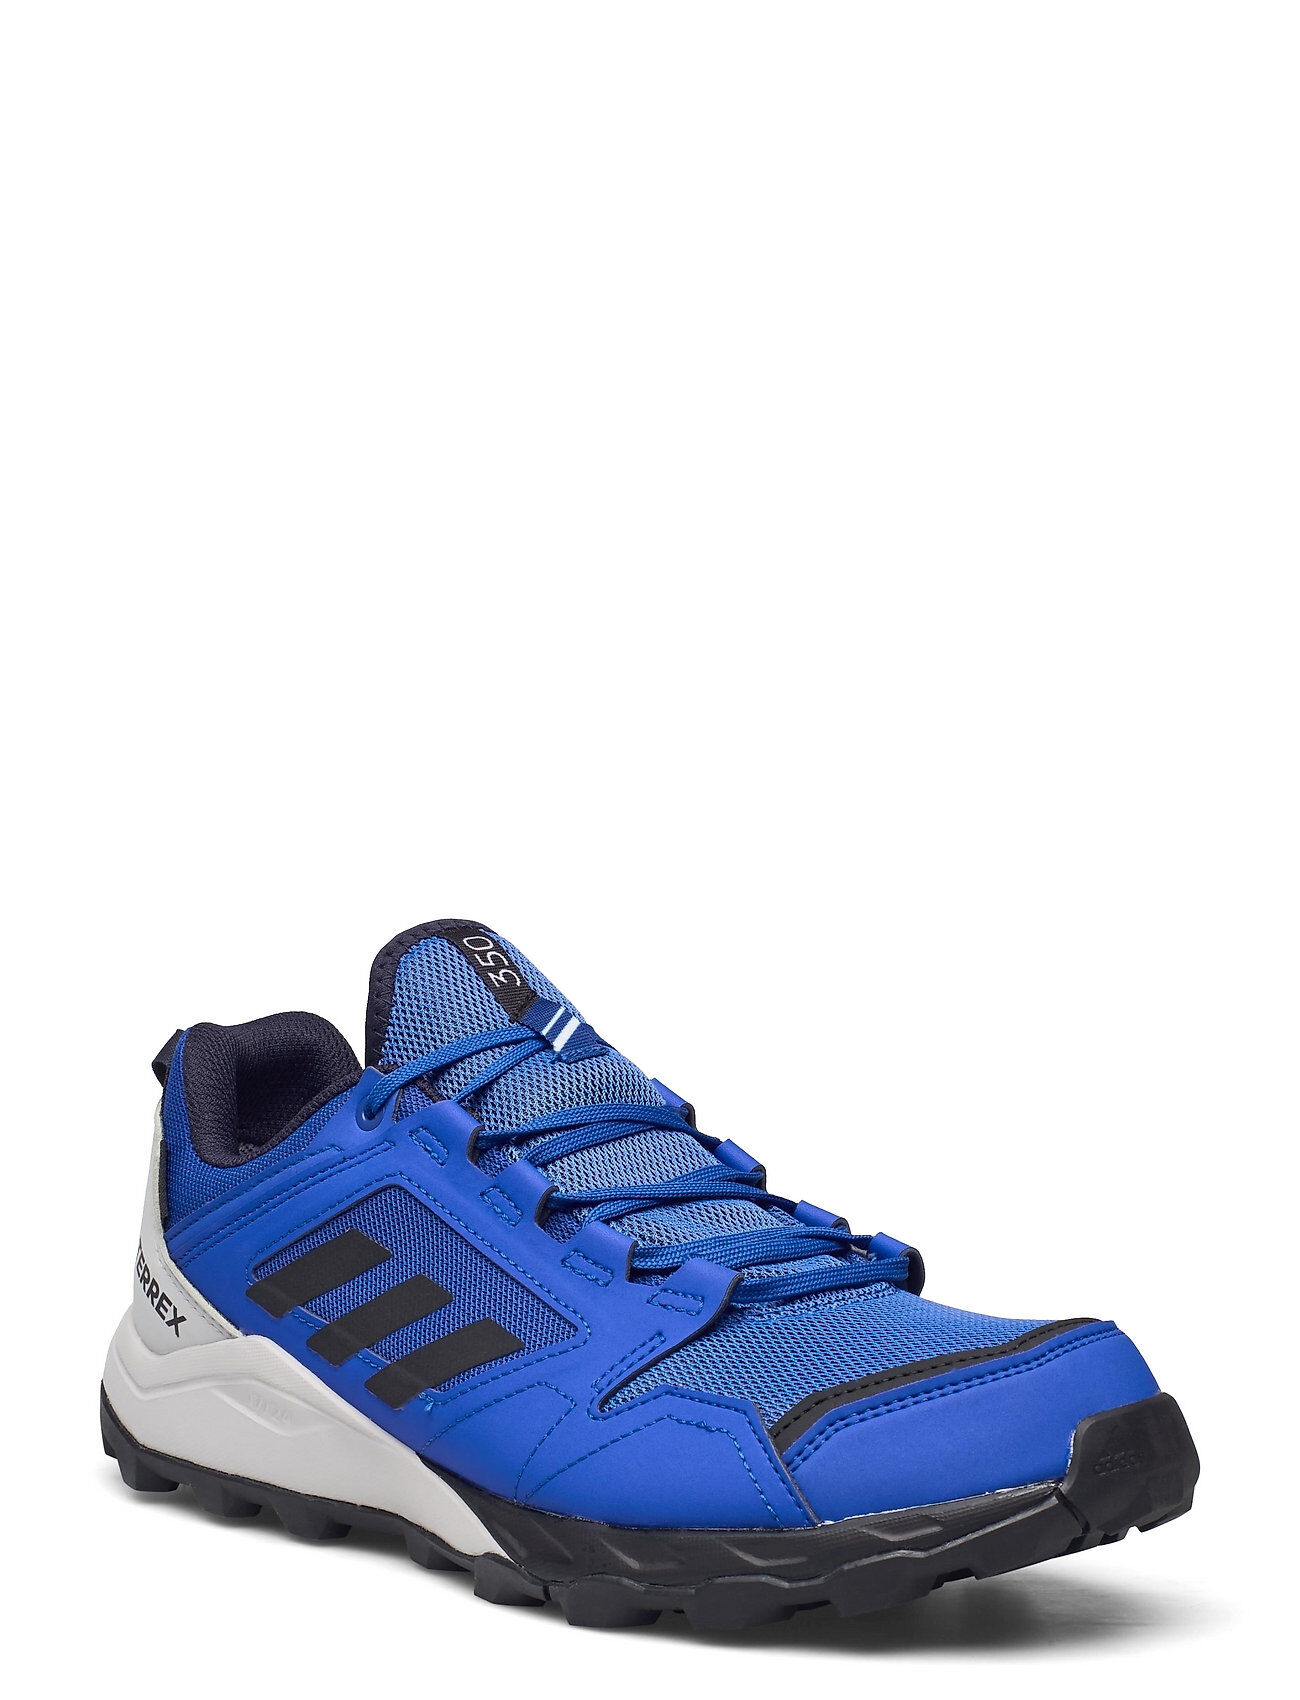 adidas Performance Terrex Agravic Tr Gore-Tex Trail Running Shoes Sport Shoes Running Shoes Blå Adidas Performance